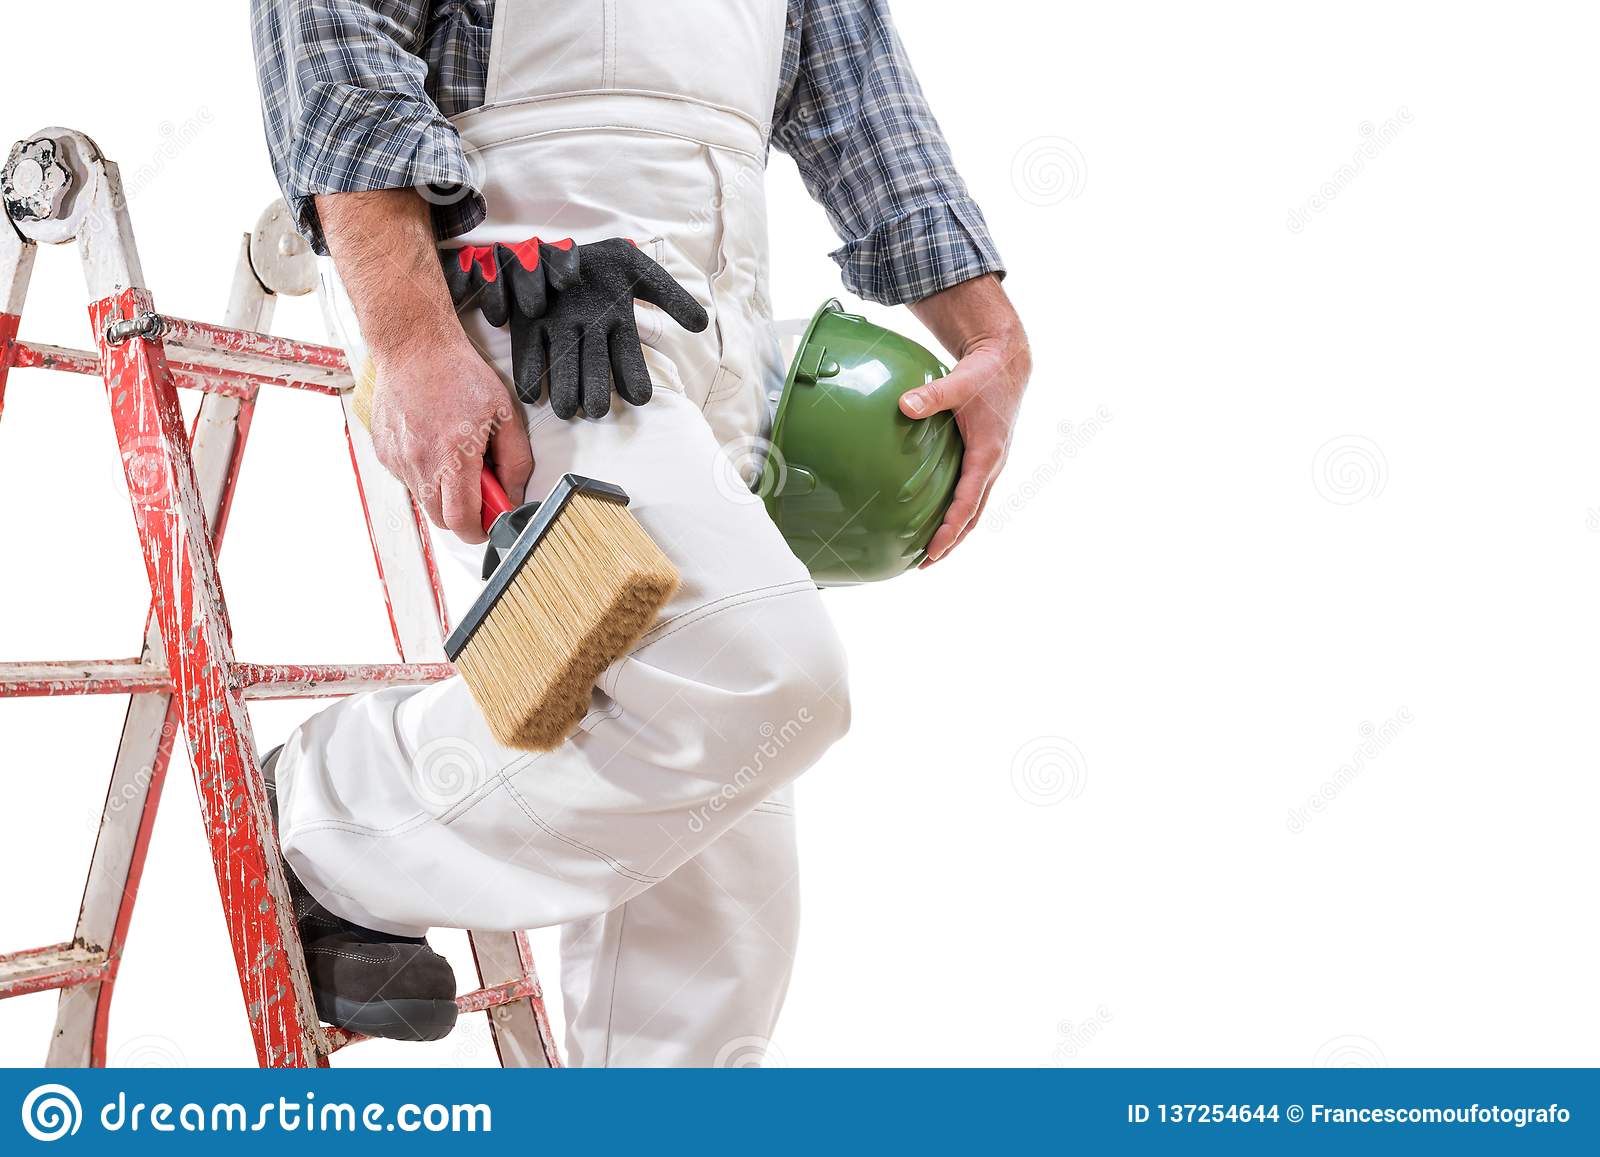 professional-house-painter-isolated-white-background-worker-ladder-work-overalls-holds-brush-to-paint-his-hands